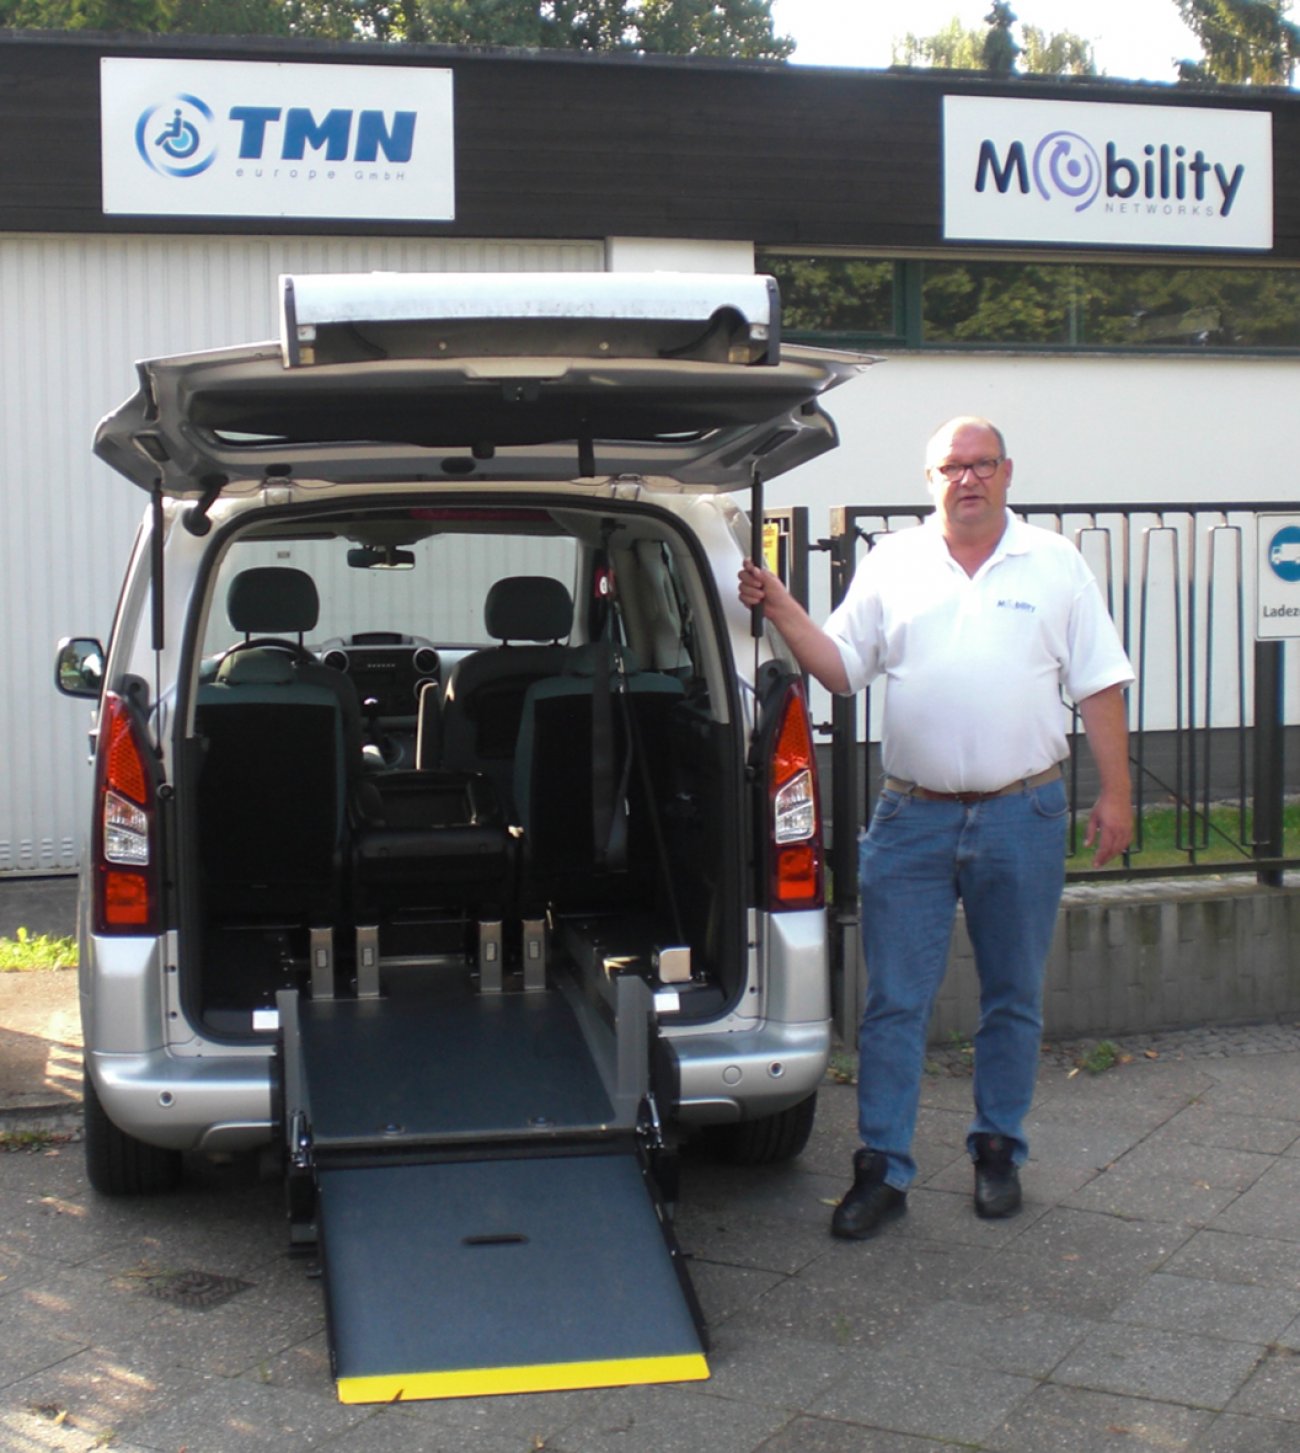 Mobility Networks Germany launches following acquisition of TMN Europe